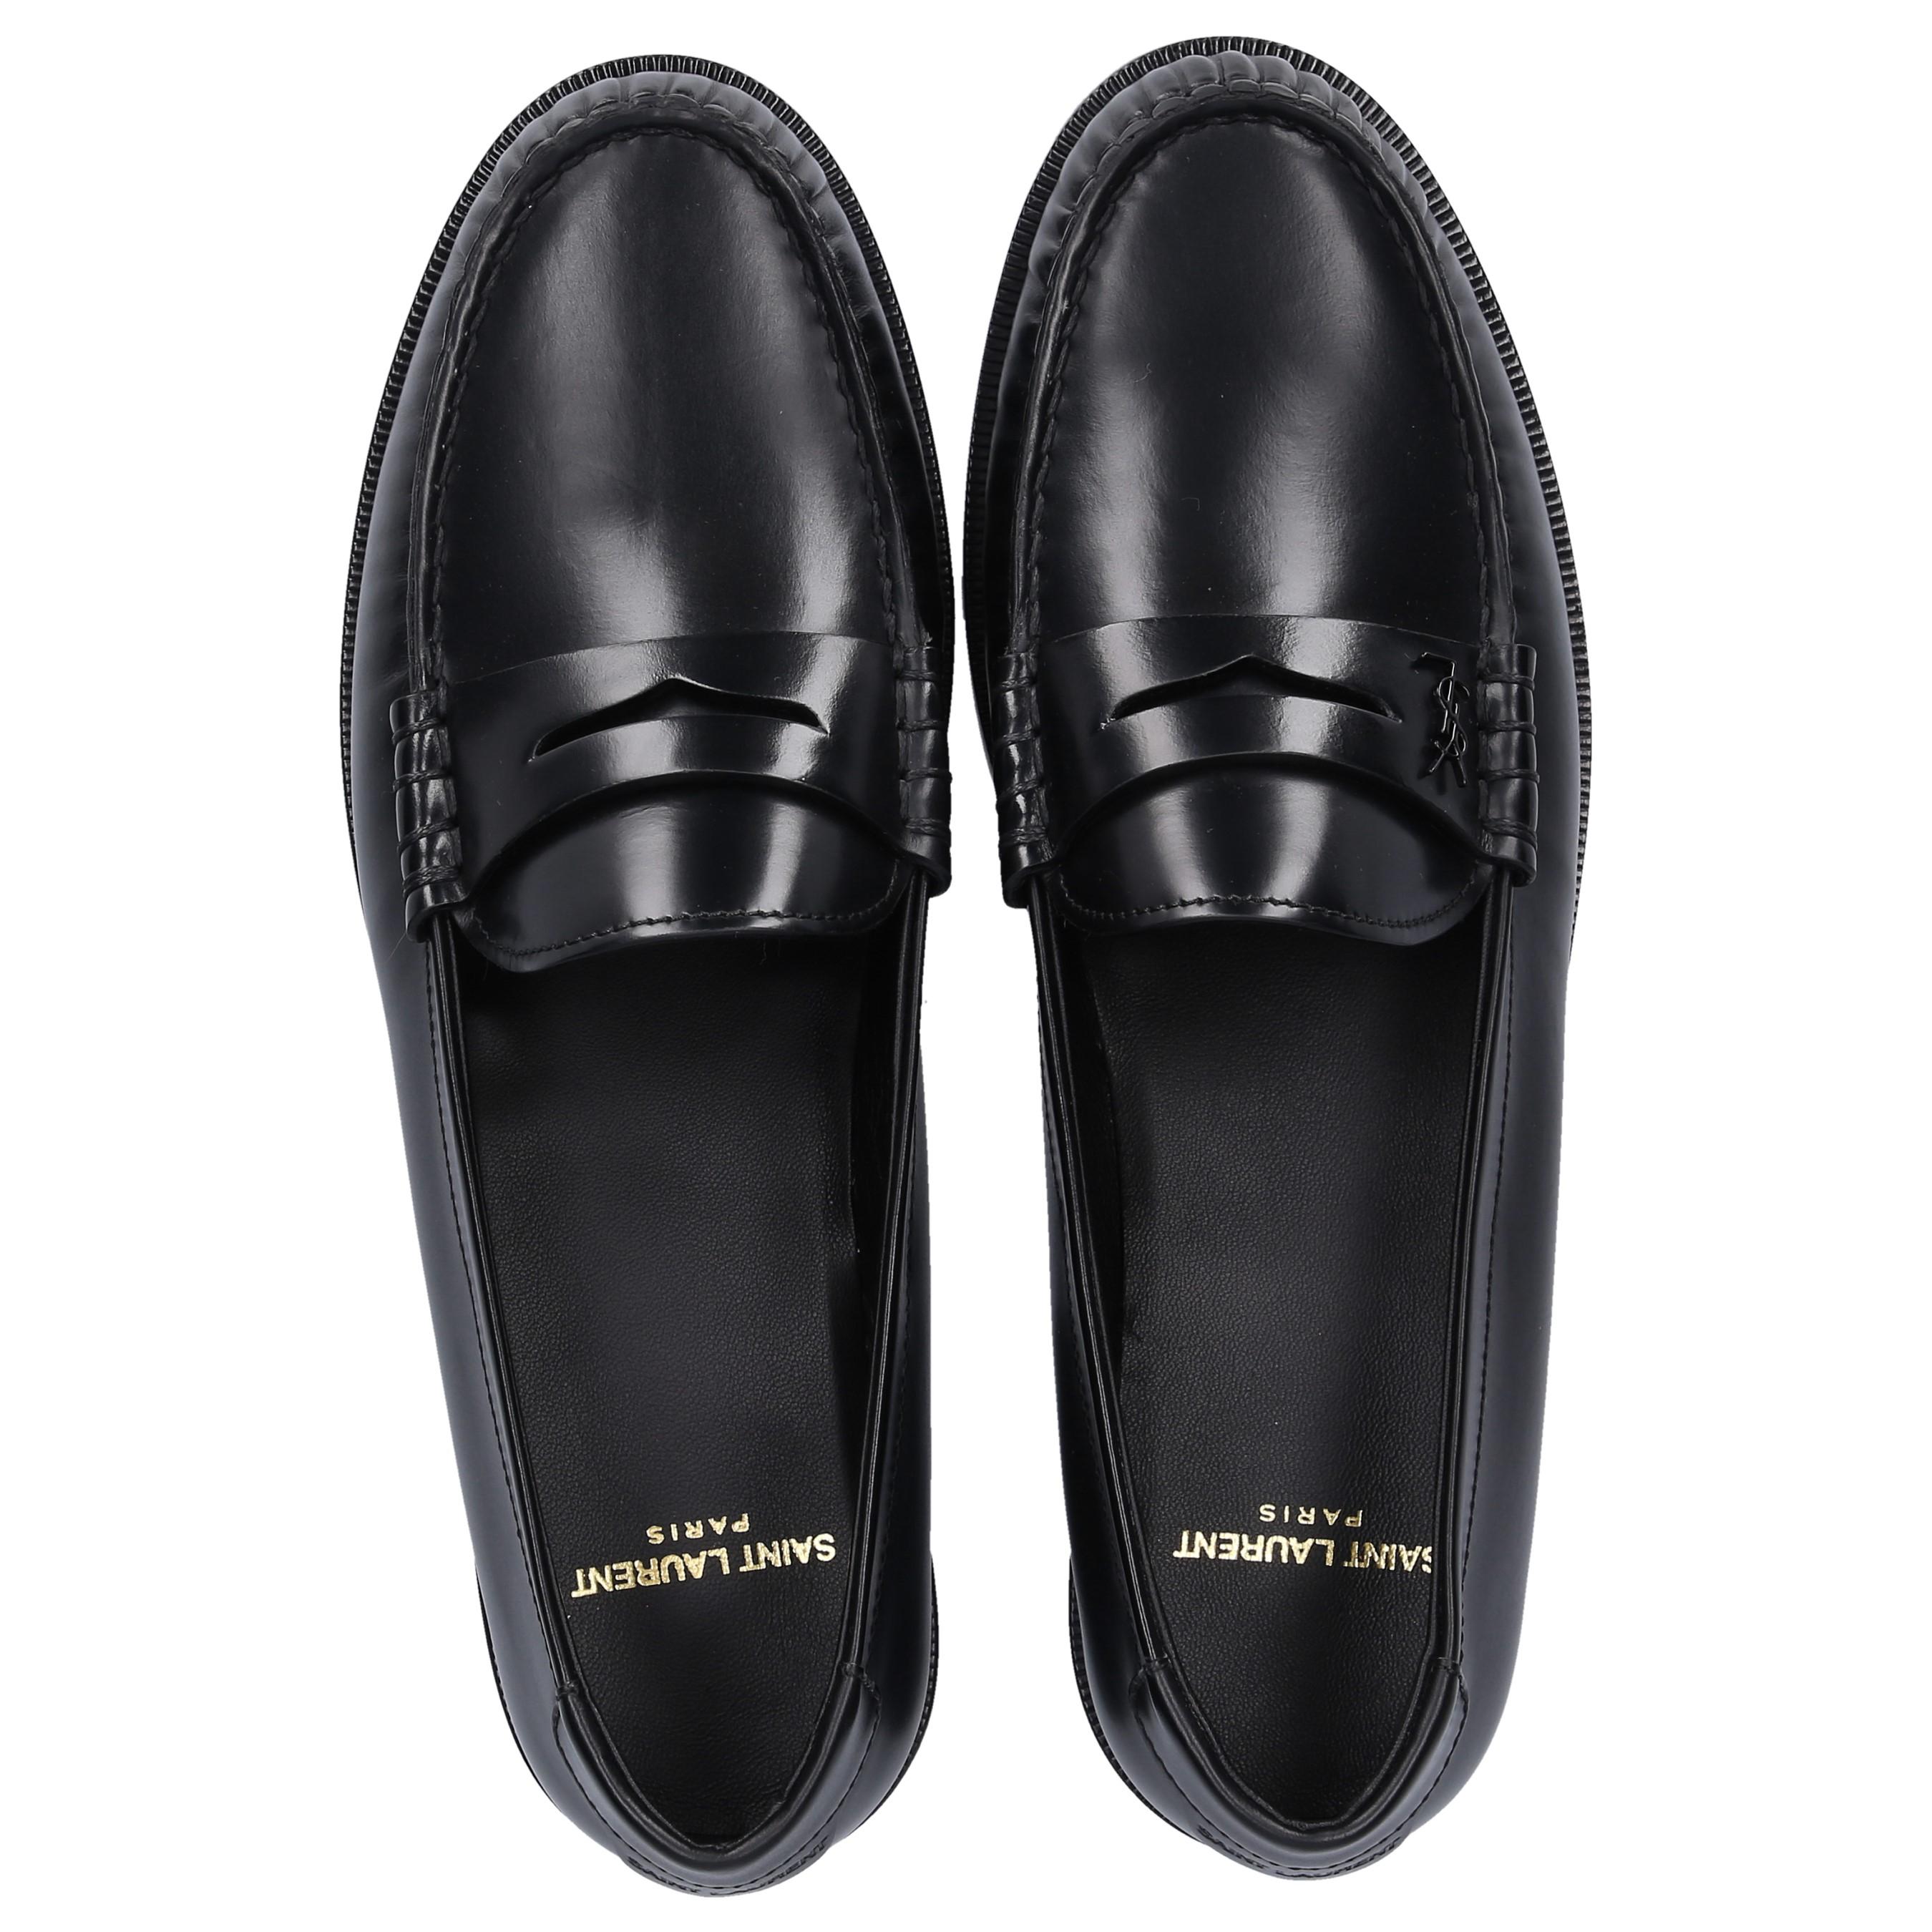 Saint Laurent Leather Loafers Le Loafer in Black - Lyst